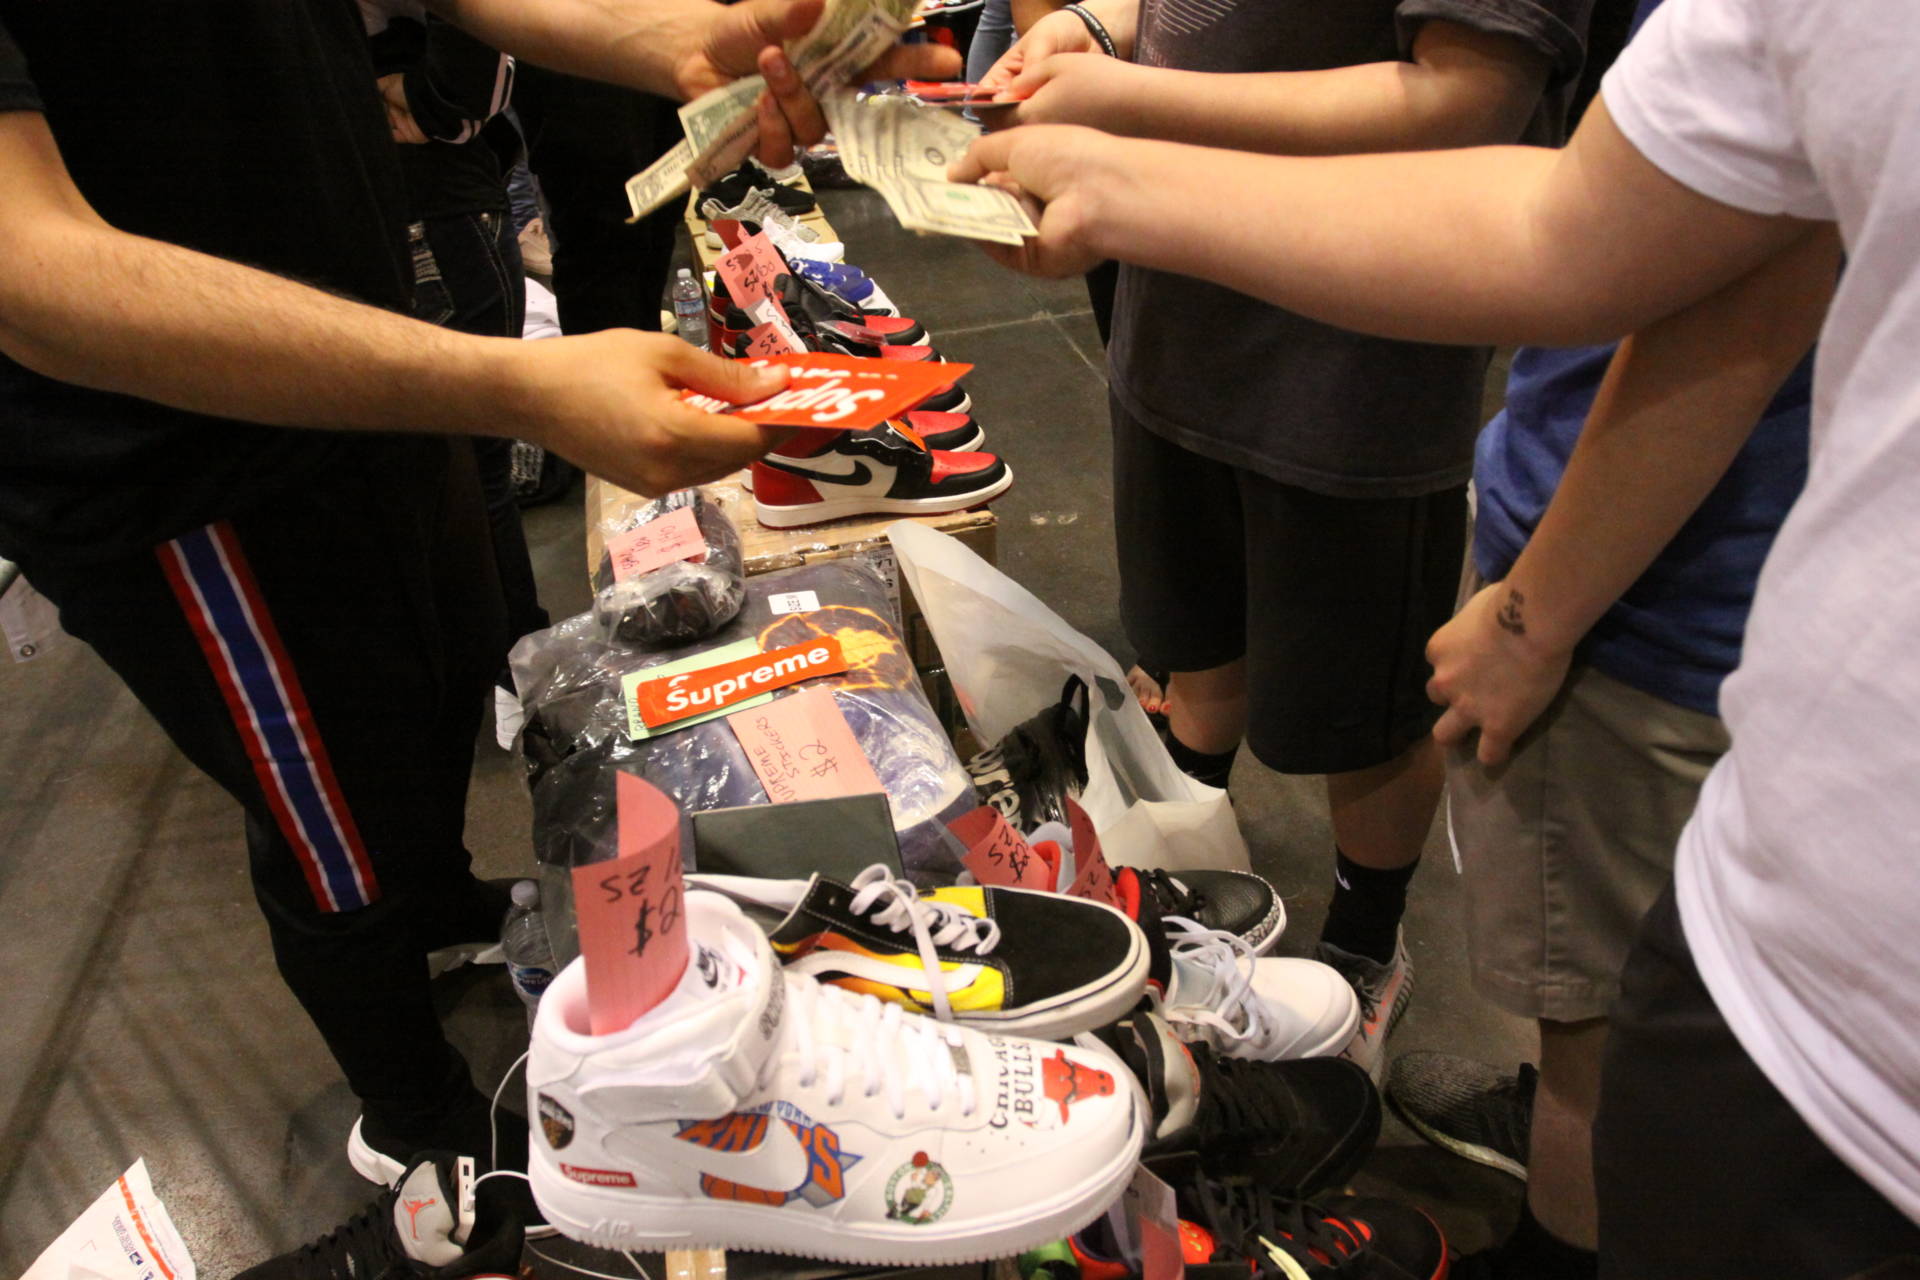 Buyers and sellers exchange goods for cash on the Sneaker Con Trading Pit floor.